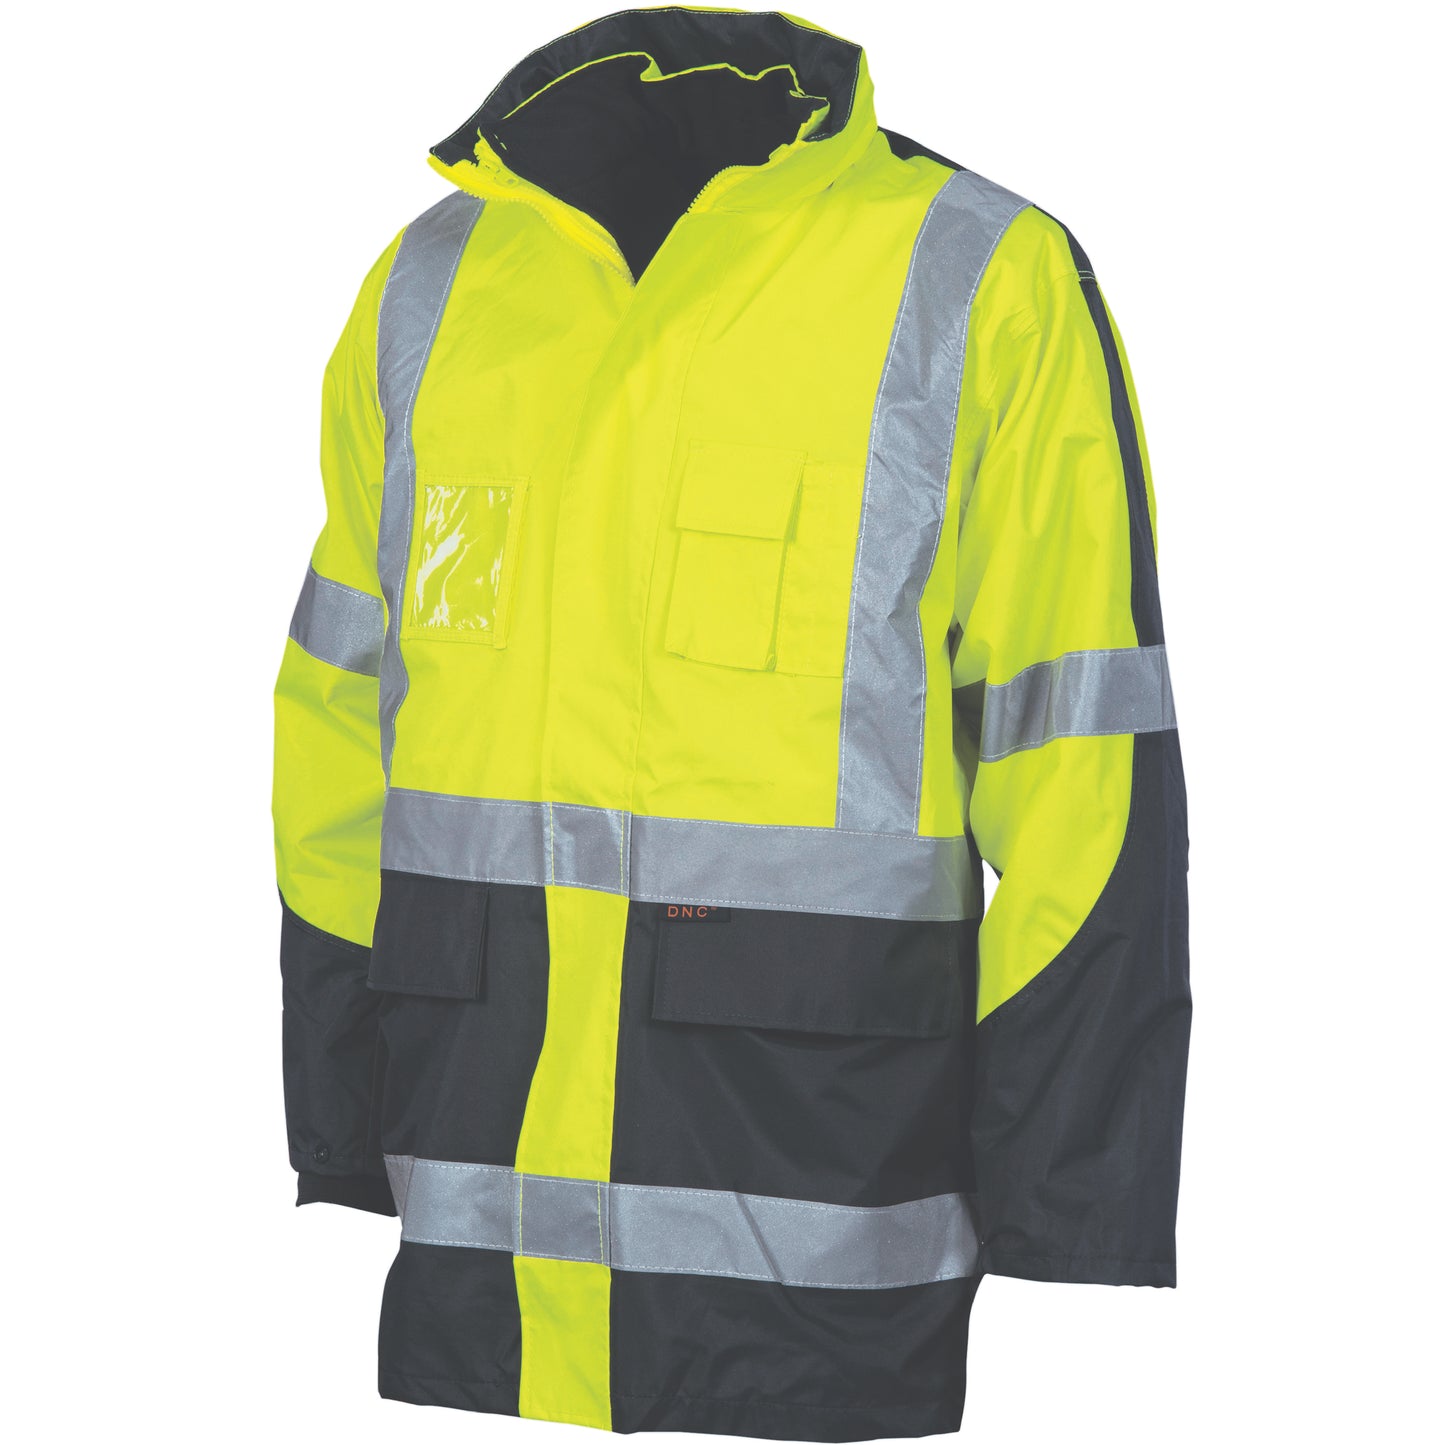 DNC HiVis Cross Back 2 Tone D/N “6 in 1” Contrast Jacket (Outer Jacket and Inner Vest can be sold separ 3998 - Star Uniforms Australia